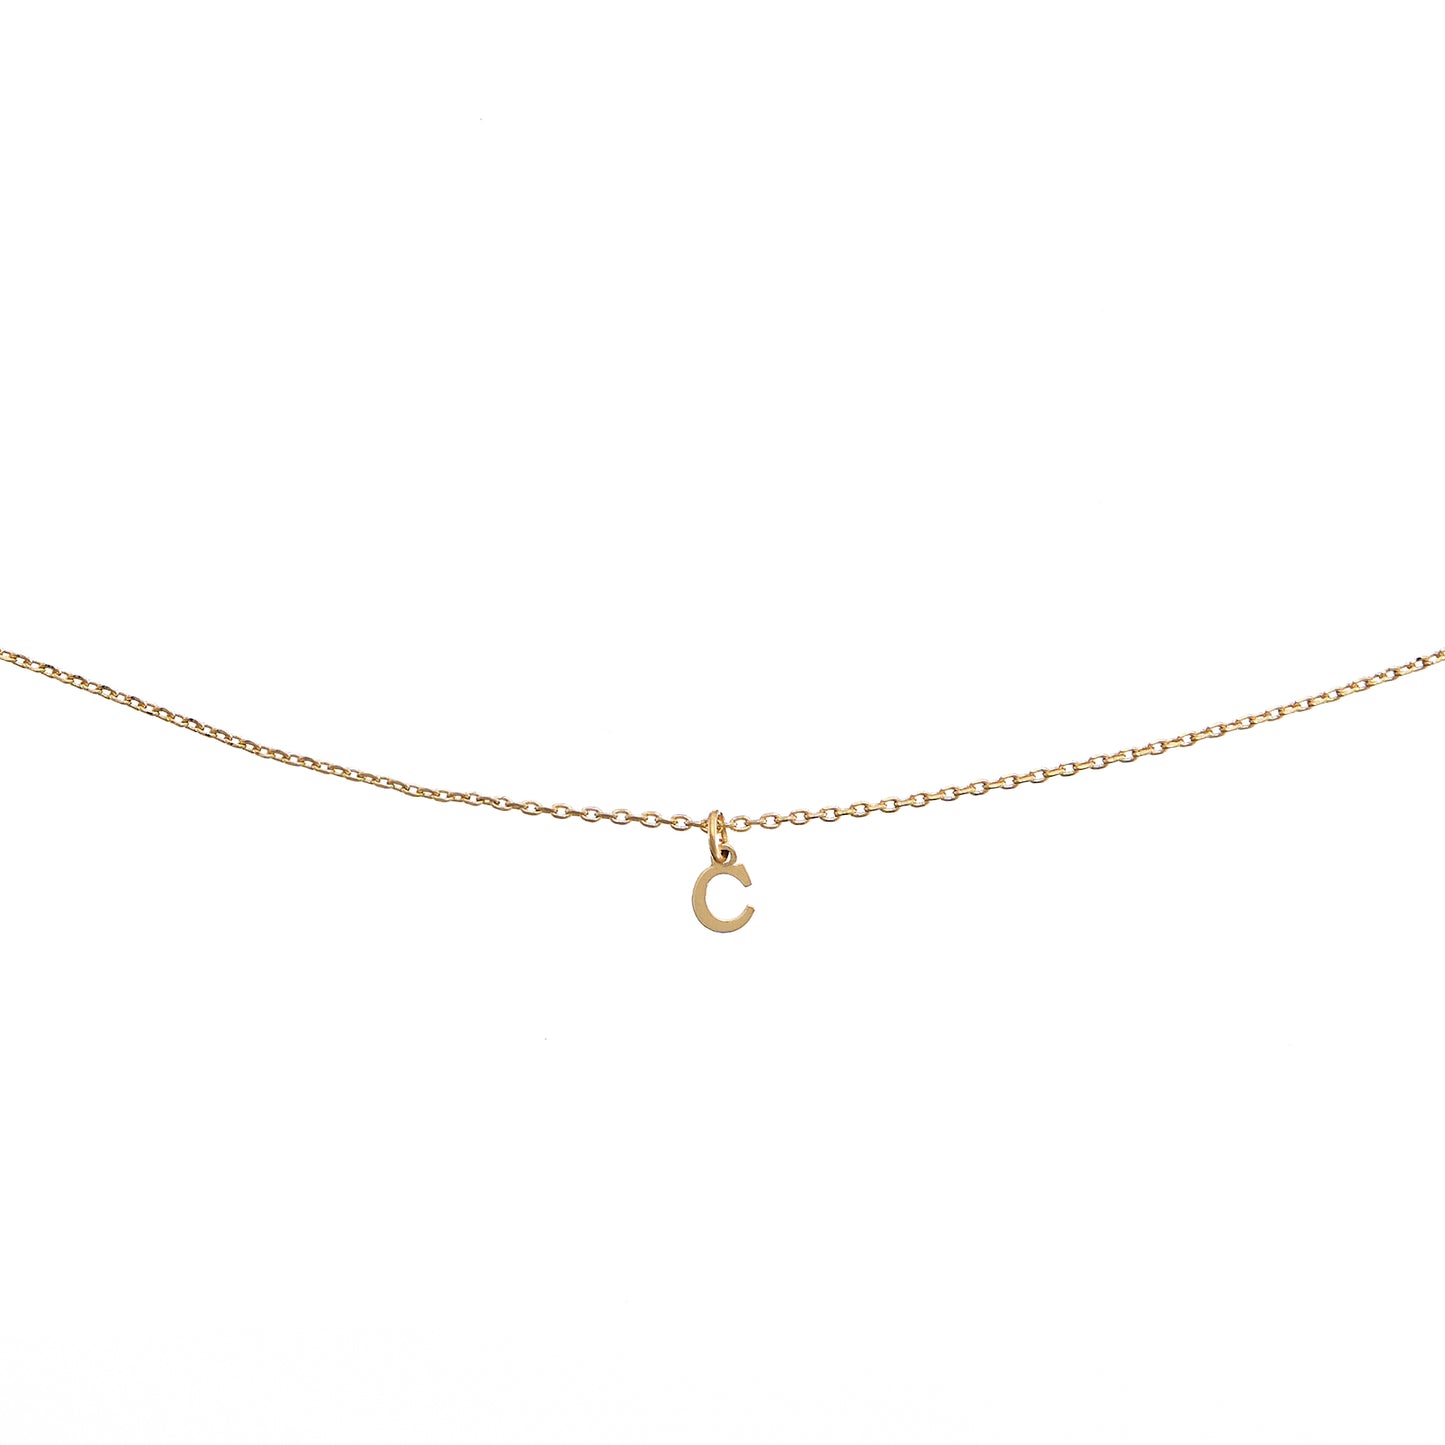 SALE Dainty Love Initial Necklace